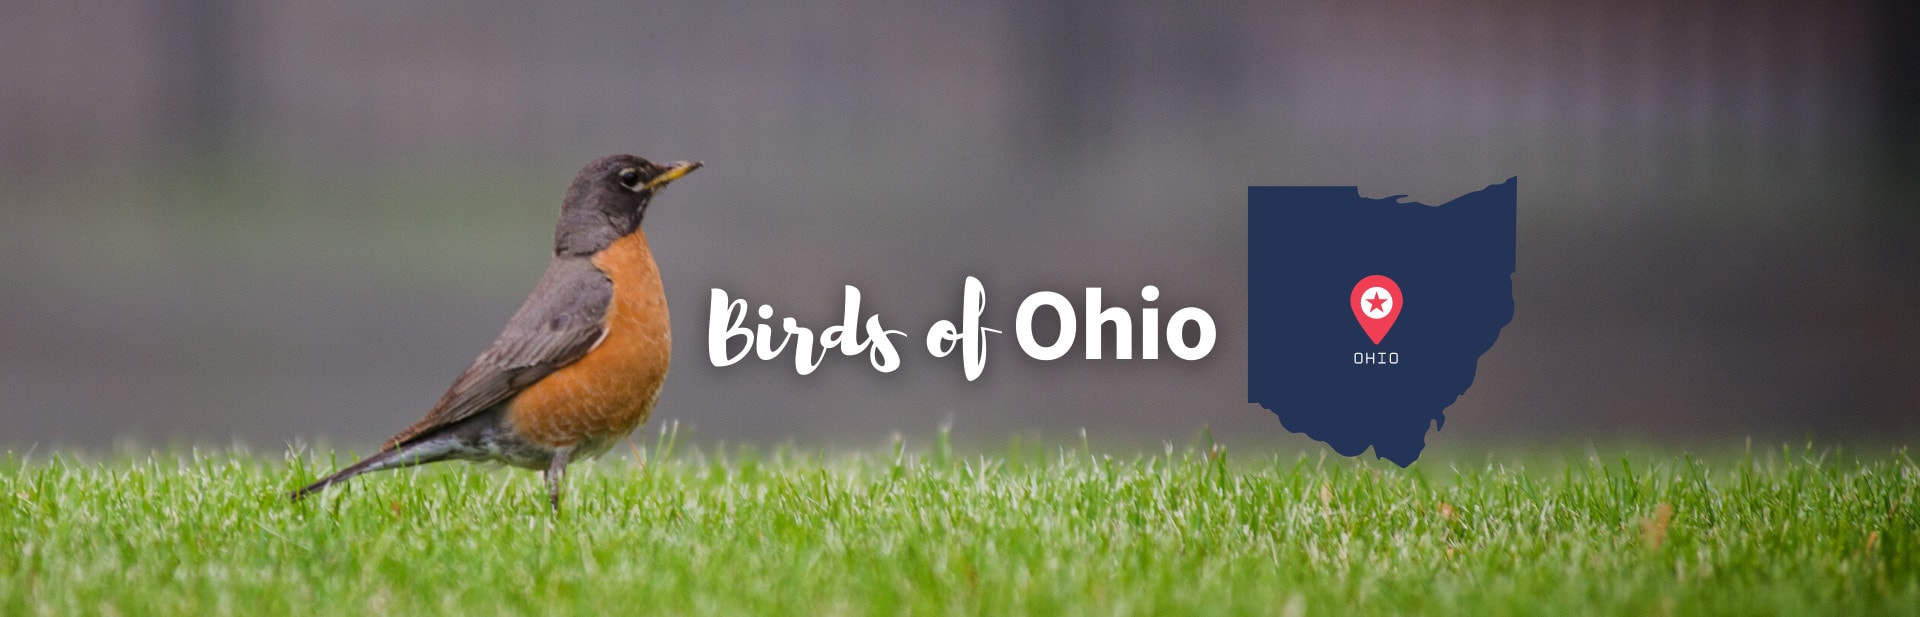 Top 40 Most Common Backyard Birds Of Ohio: ID Guide with Photos